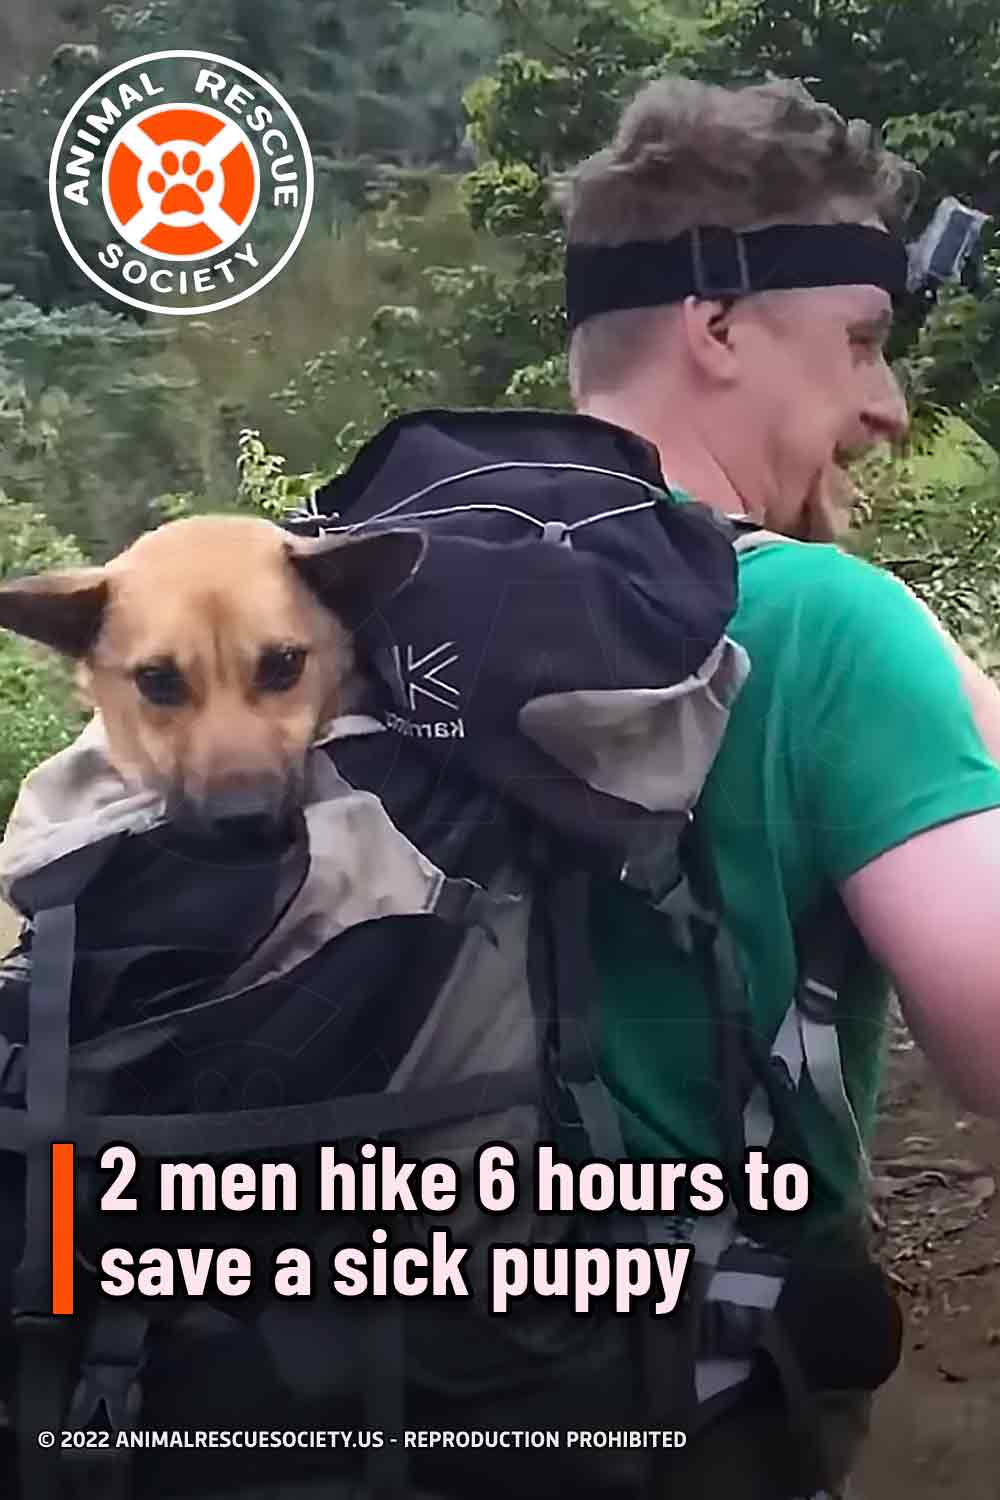 2 men hike 6 hours to save a sick puppy